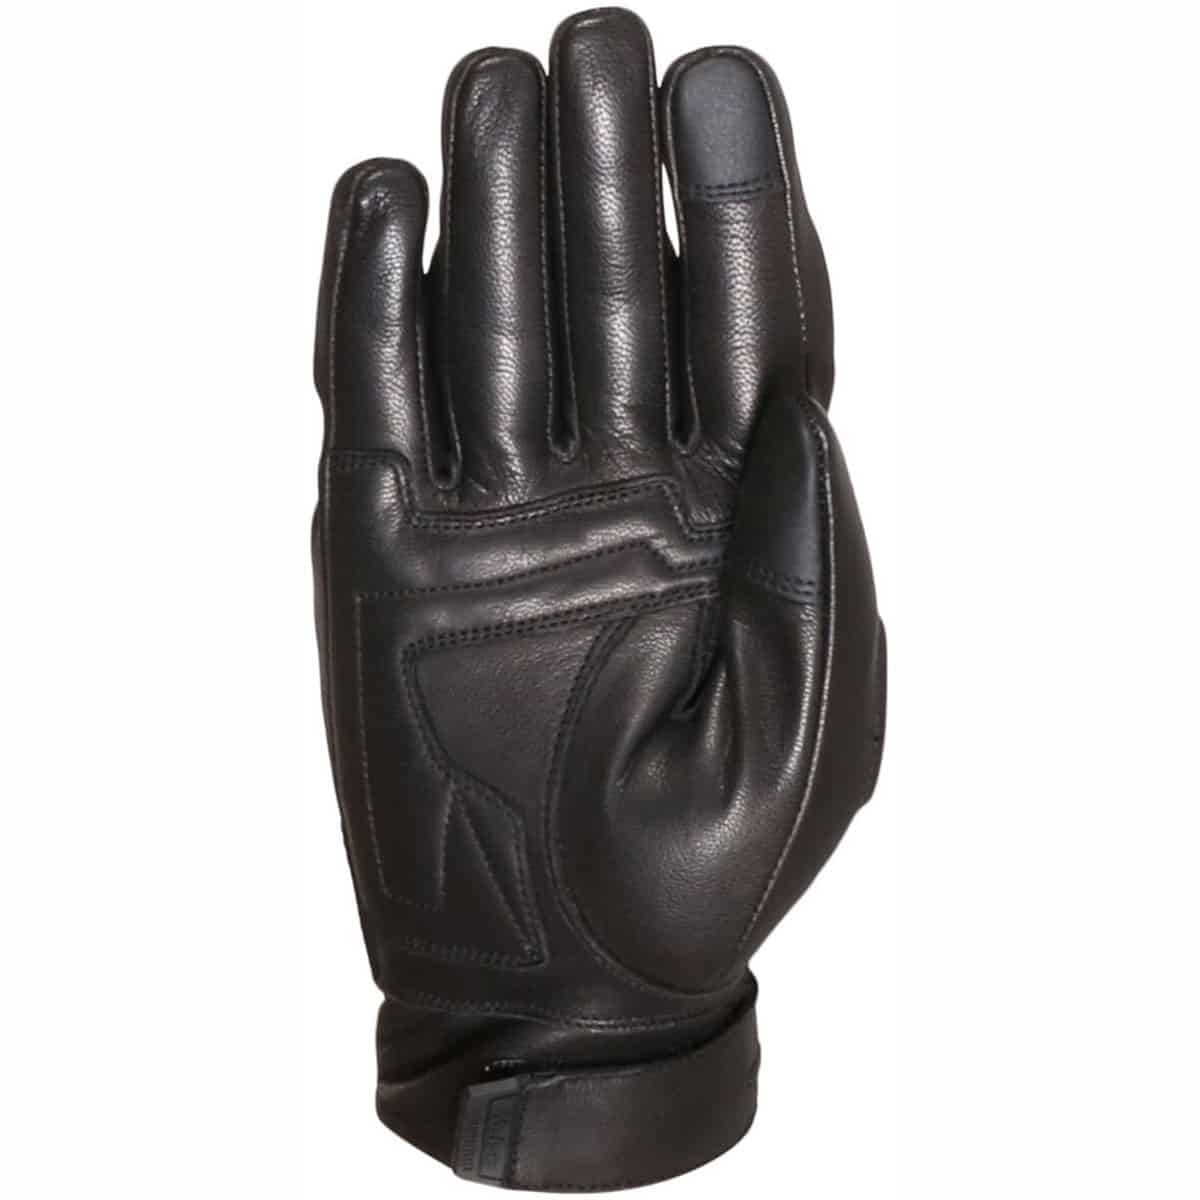 Weise Union summer leather motorcycle gloves black 2